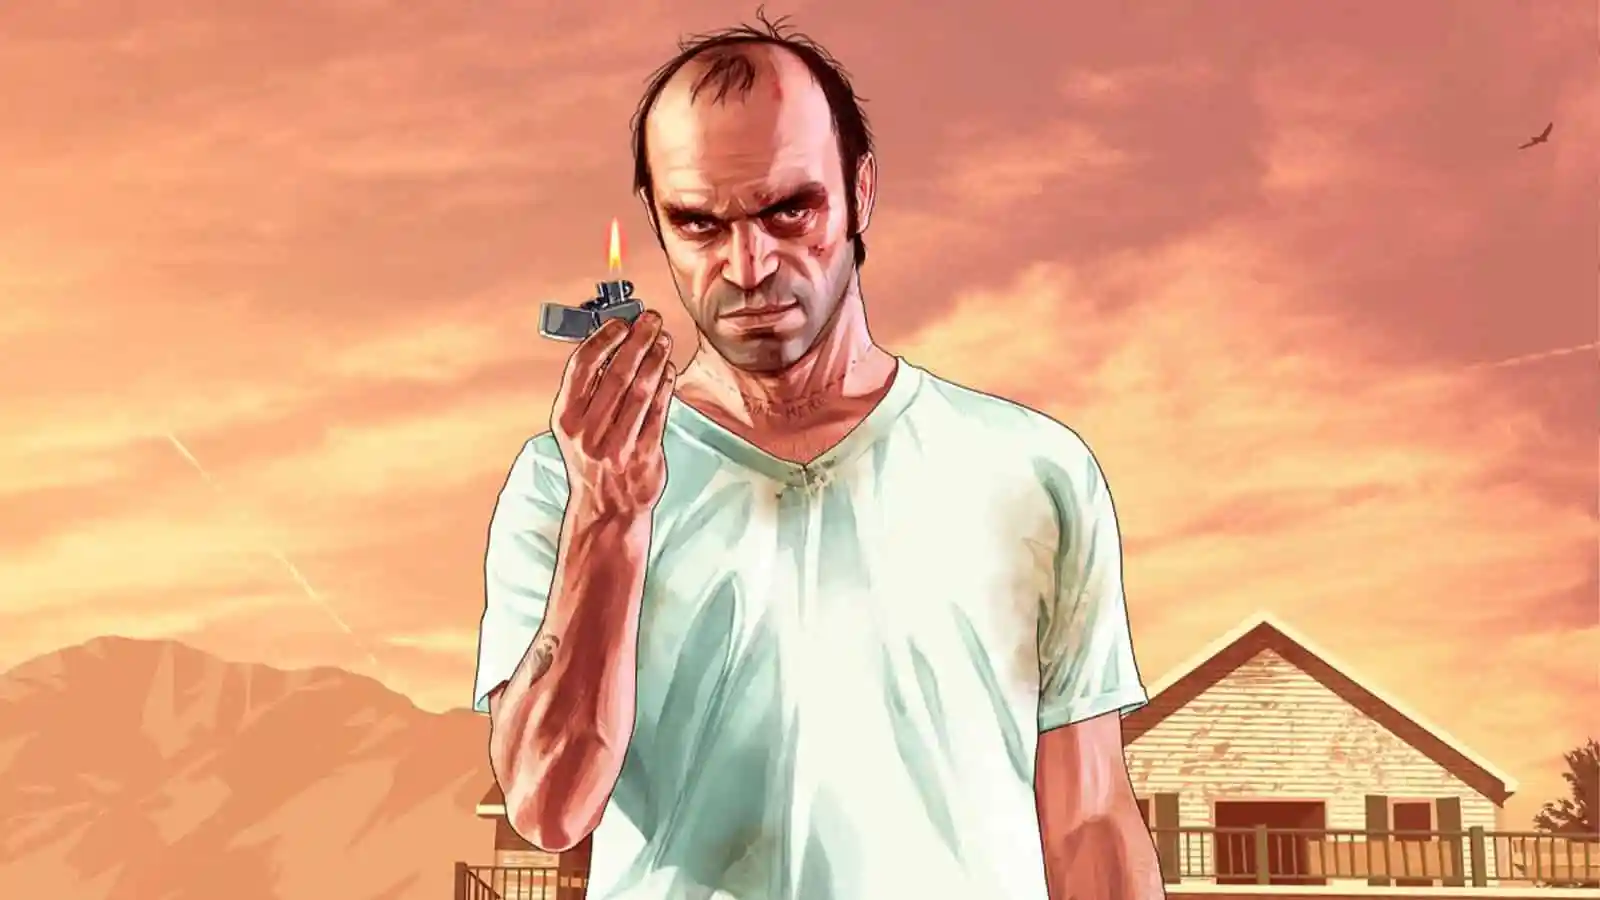 Official art of Trevor, one of GTA 5 protagonists, holding a lighter. Trevor is white, his hair is getting bald, and he wears a white T-shirt.